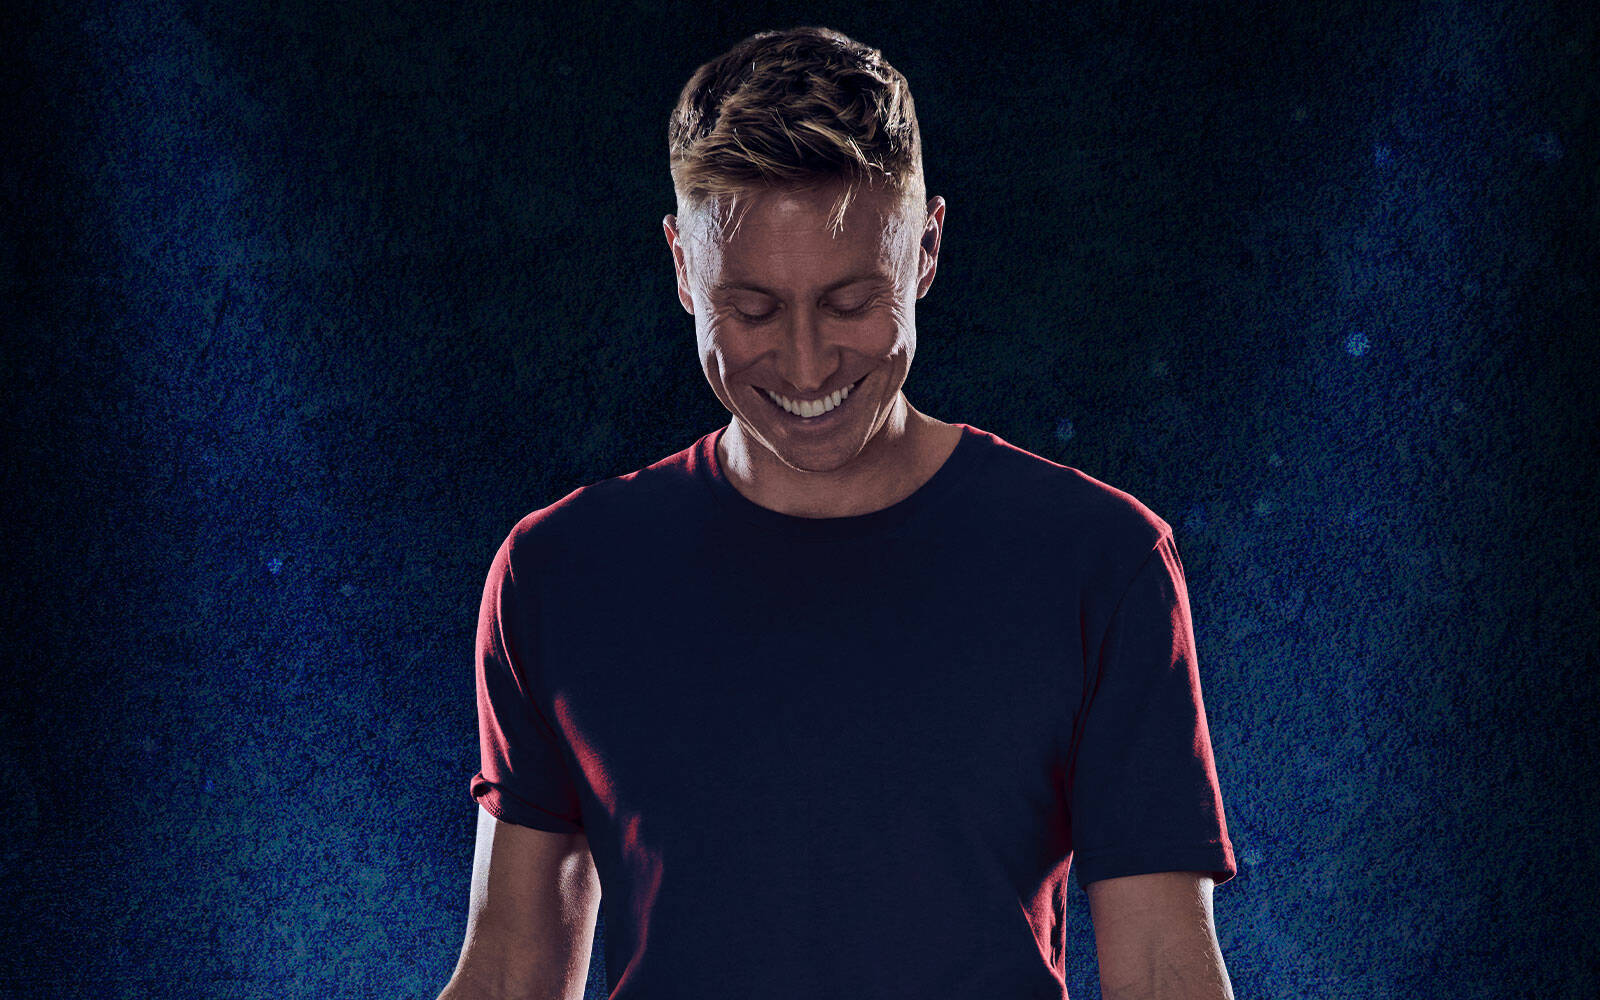 russell howard live tour running time